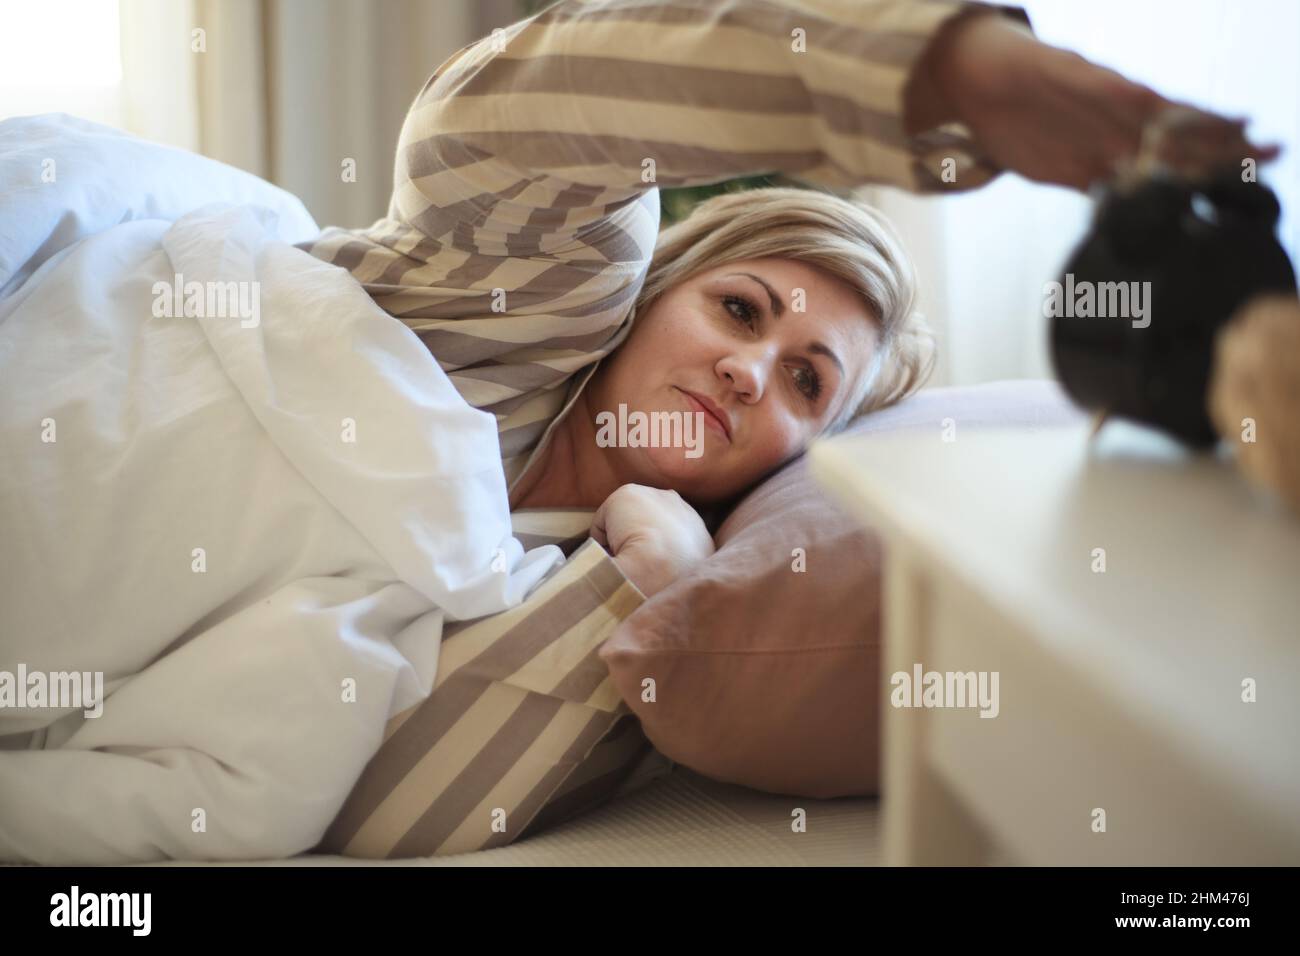 Overweight woman waking up in bed and switching off the alarm clock at home. Stock Photo